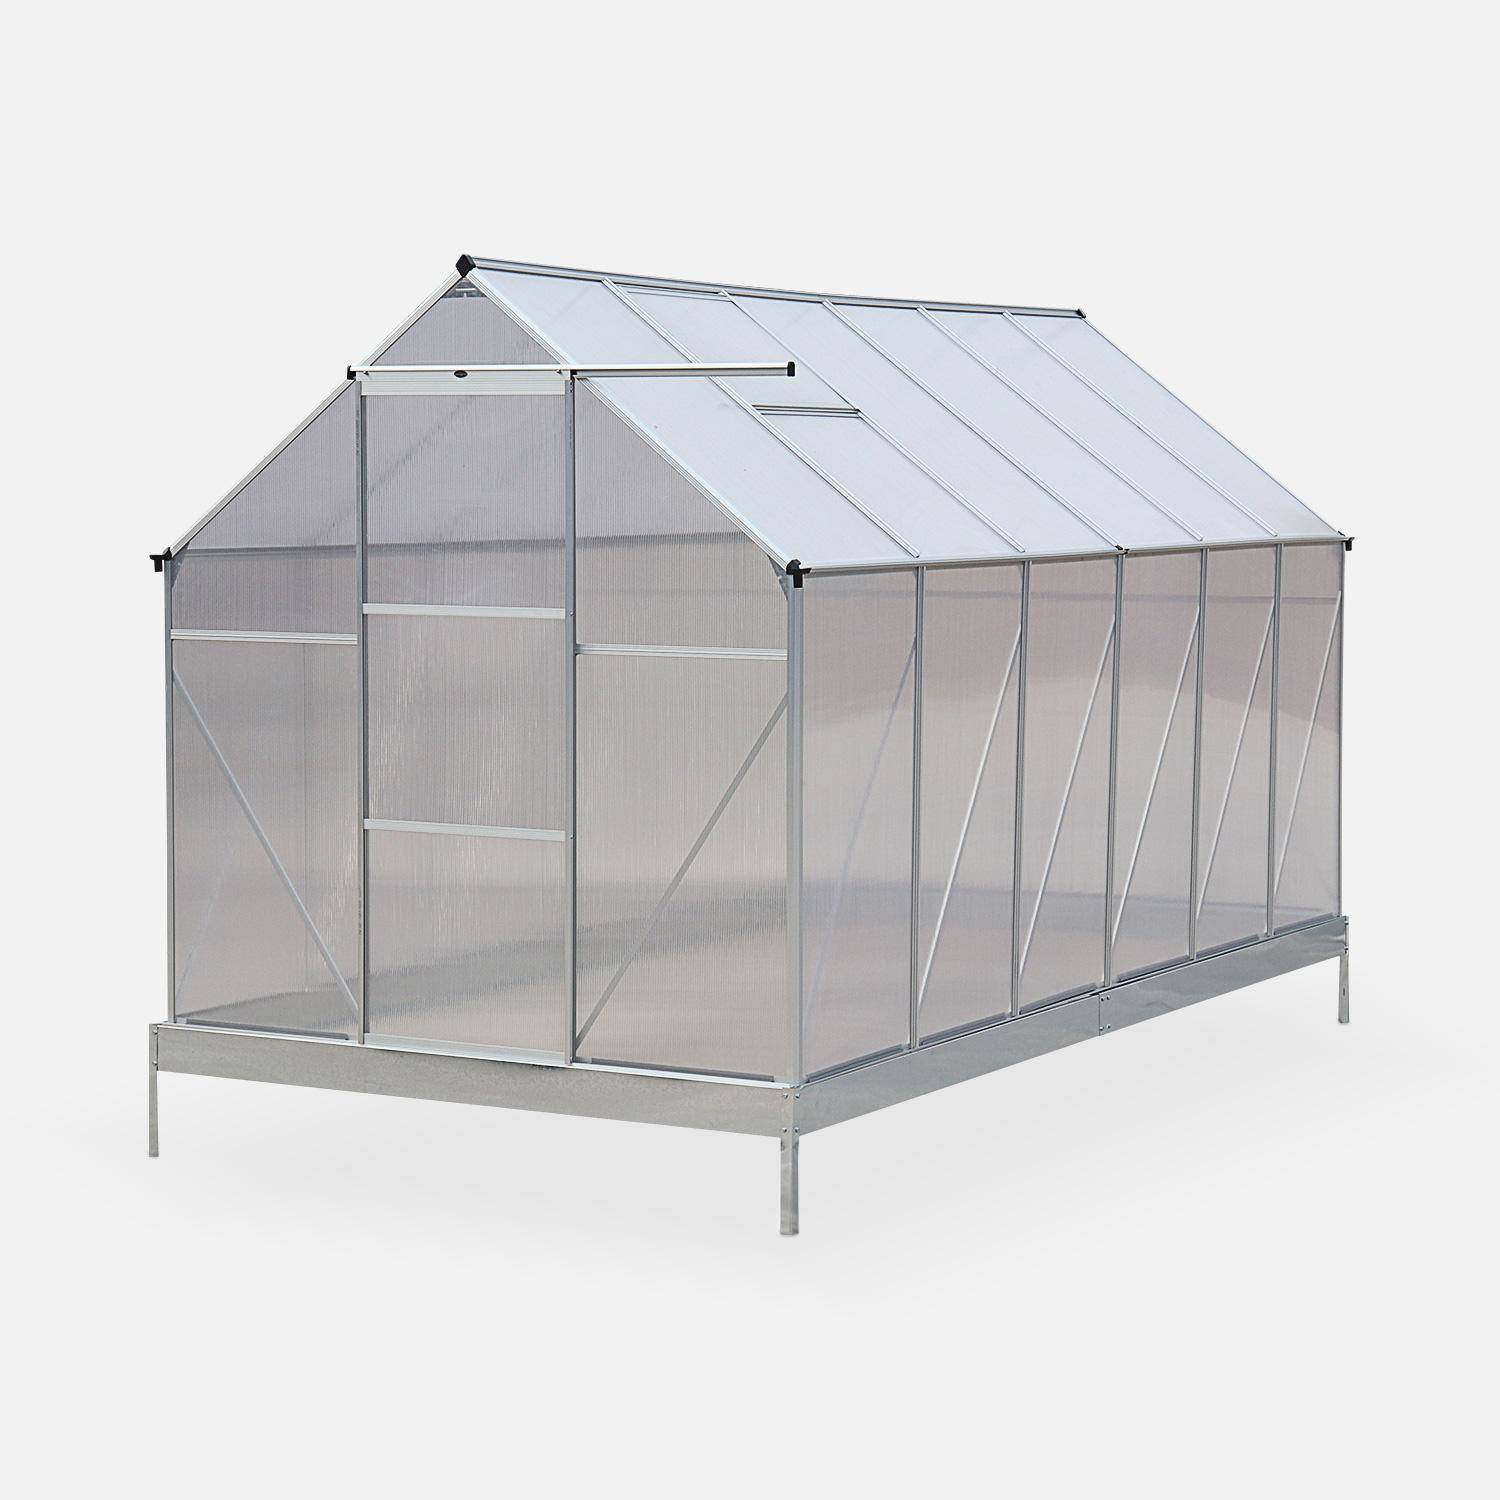 7m², 14x7FT polycarbonate (4mm) greenhouse with base frame - 2 skylights, gutter - Sapin - Grey,sweeek,Photo1